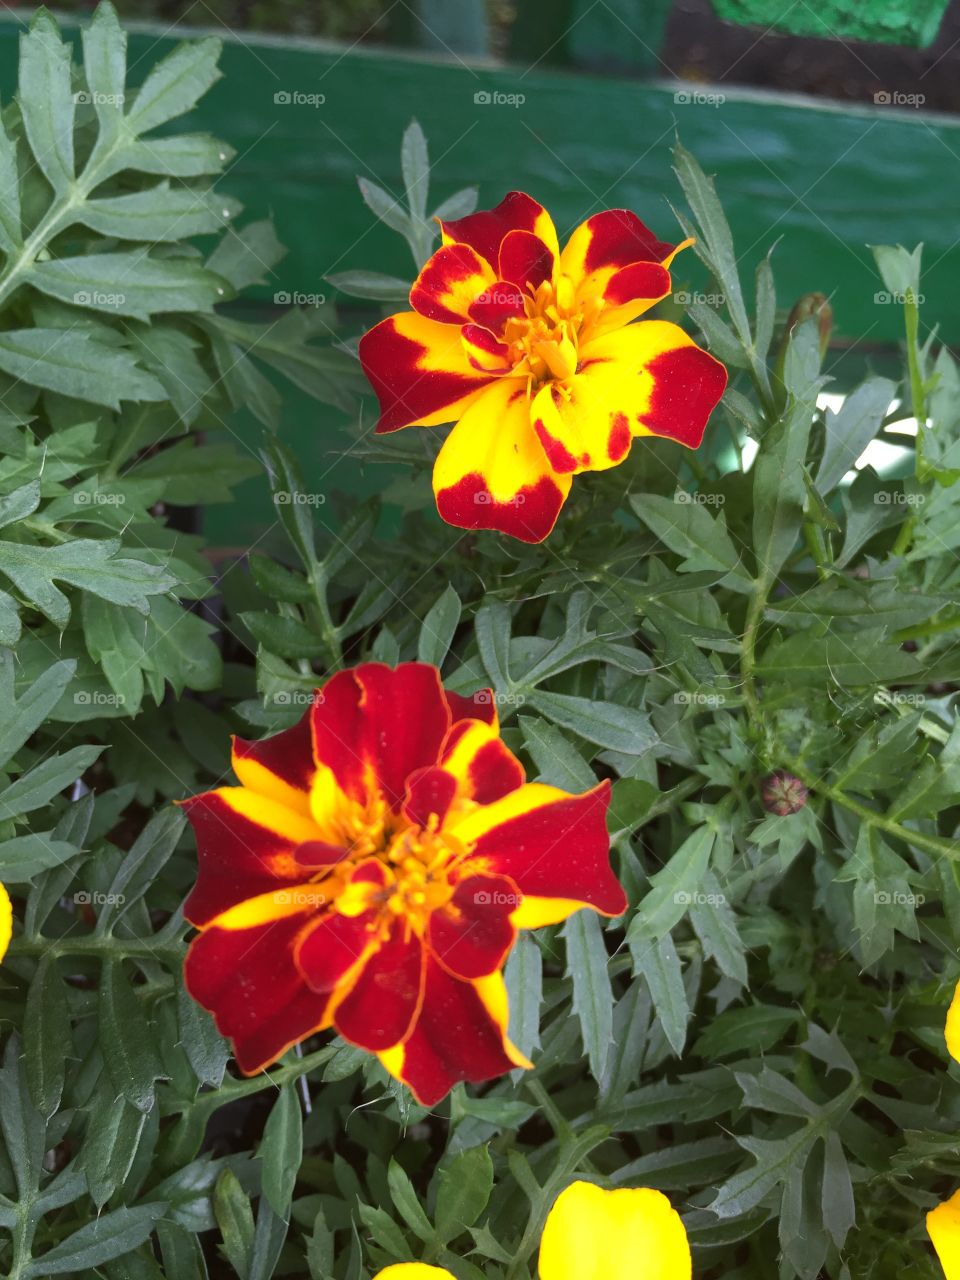 Bright bi-color red and yellow flowers.